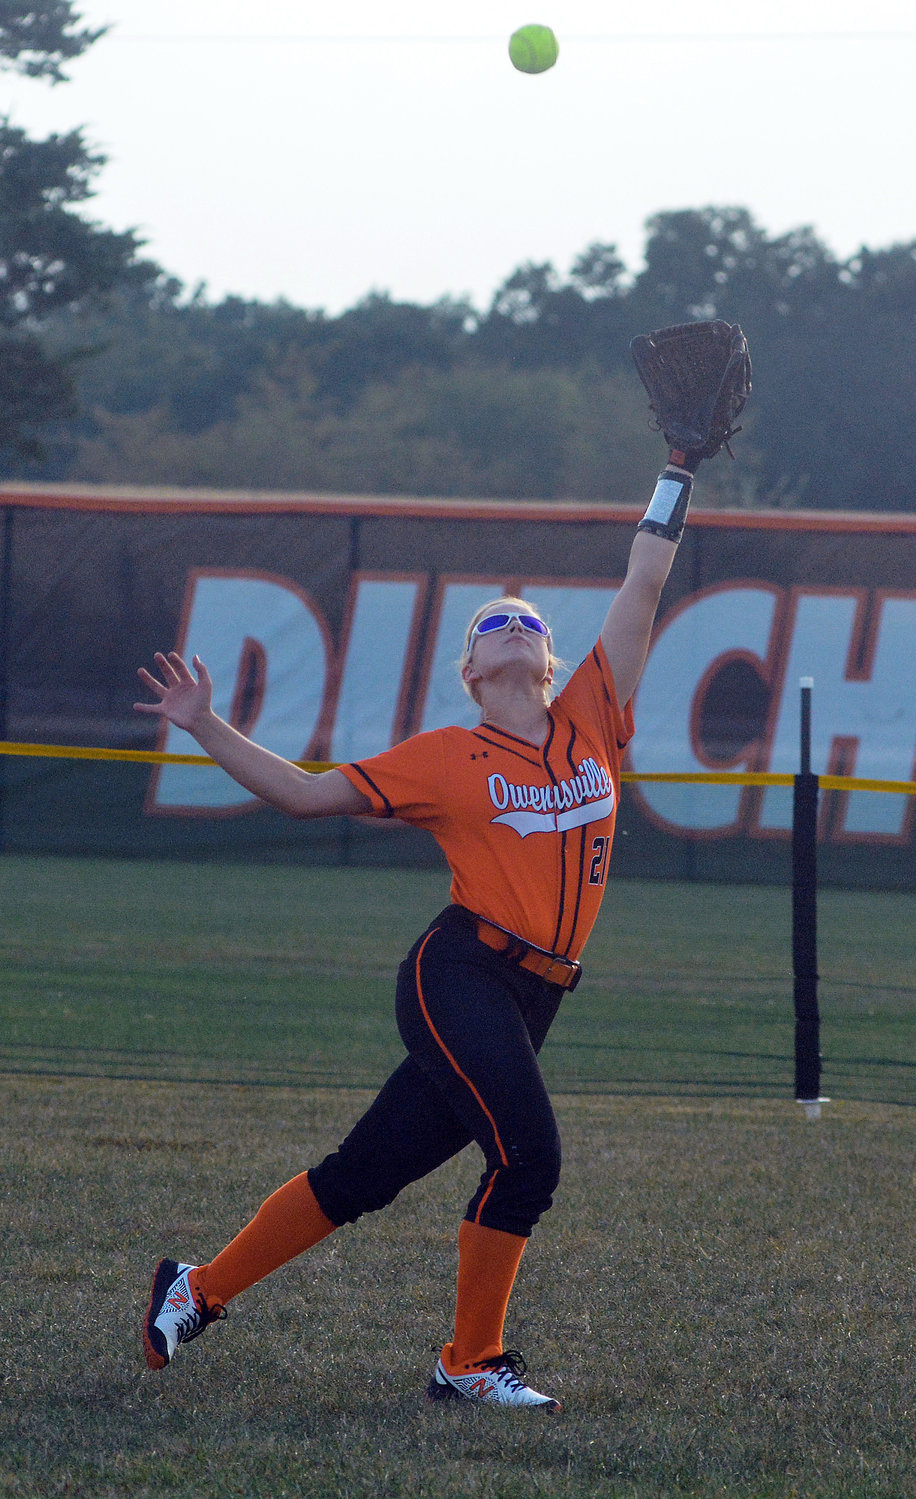 Bailee Dare (below) goes back to make a catch in right field with the Dutchgirls signage in the background during Owensville’s 21-2 victory over St. James in the nightcap of last Wednesday’s FRC doubleheader at OHS Field.